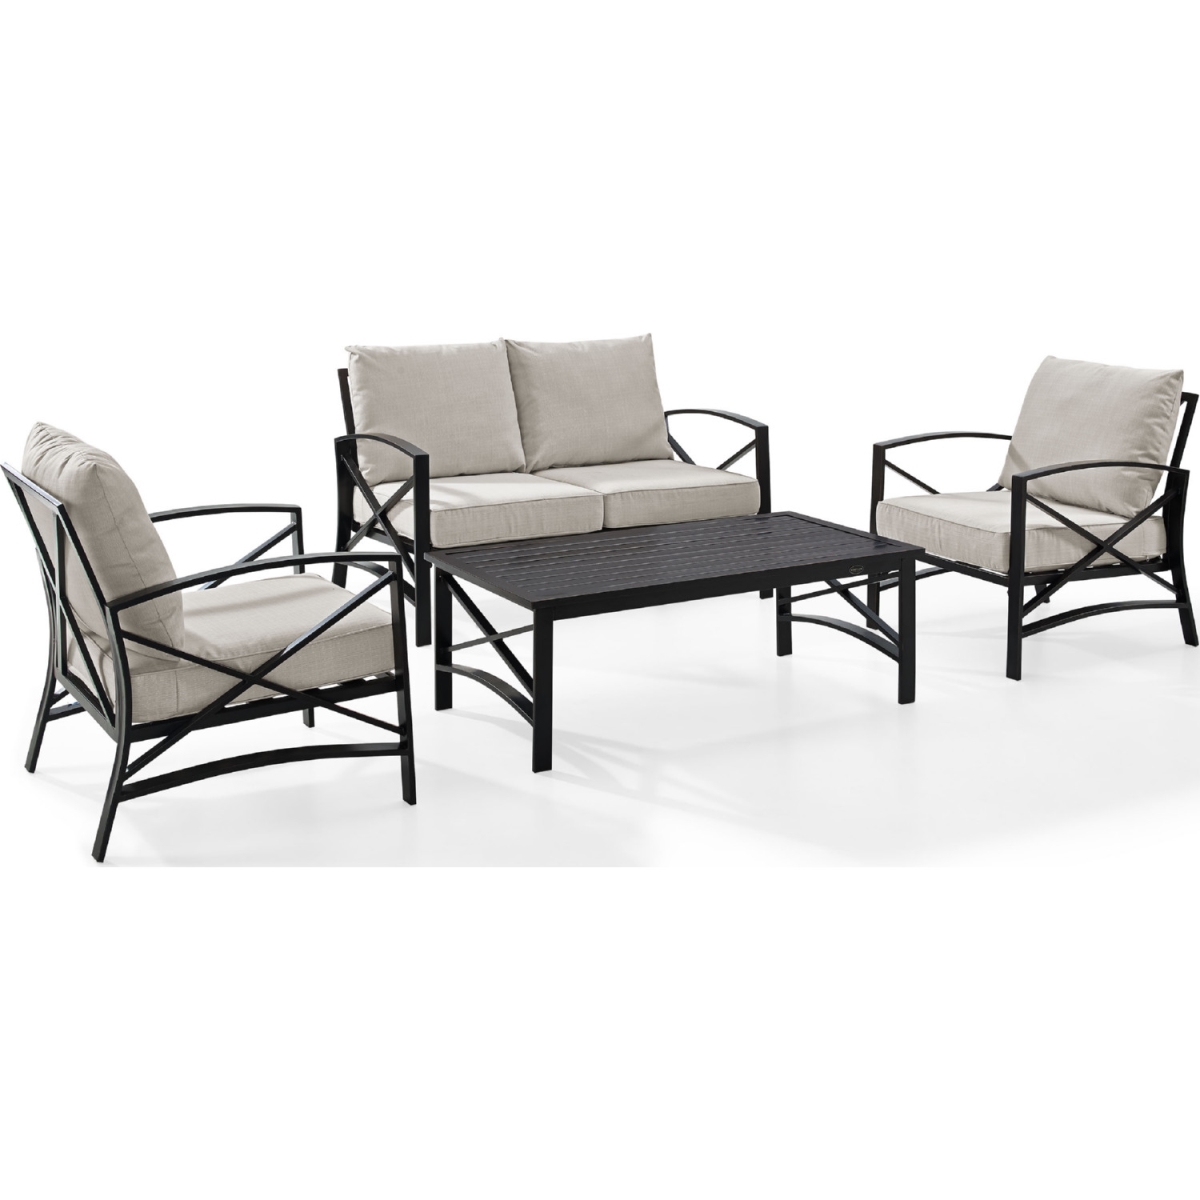 Ko60009bz-ol 4 Piece Kaplan Outdoor Seating Set With Oatmeal Cushion - Loveseat, Two Chairs, Coffee Table